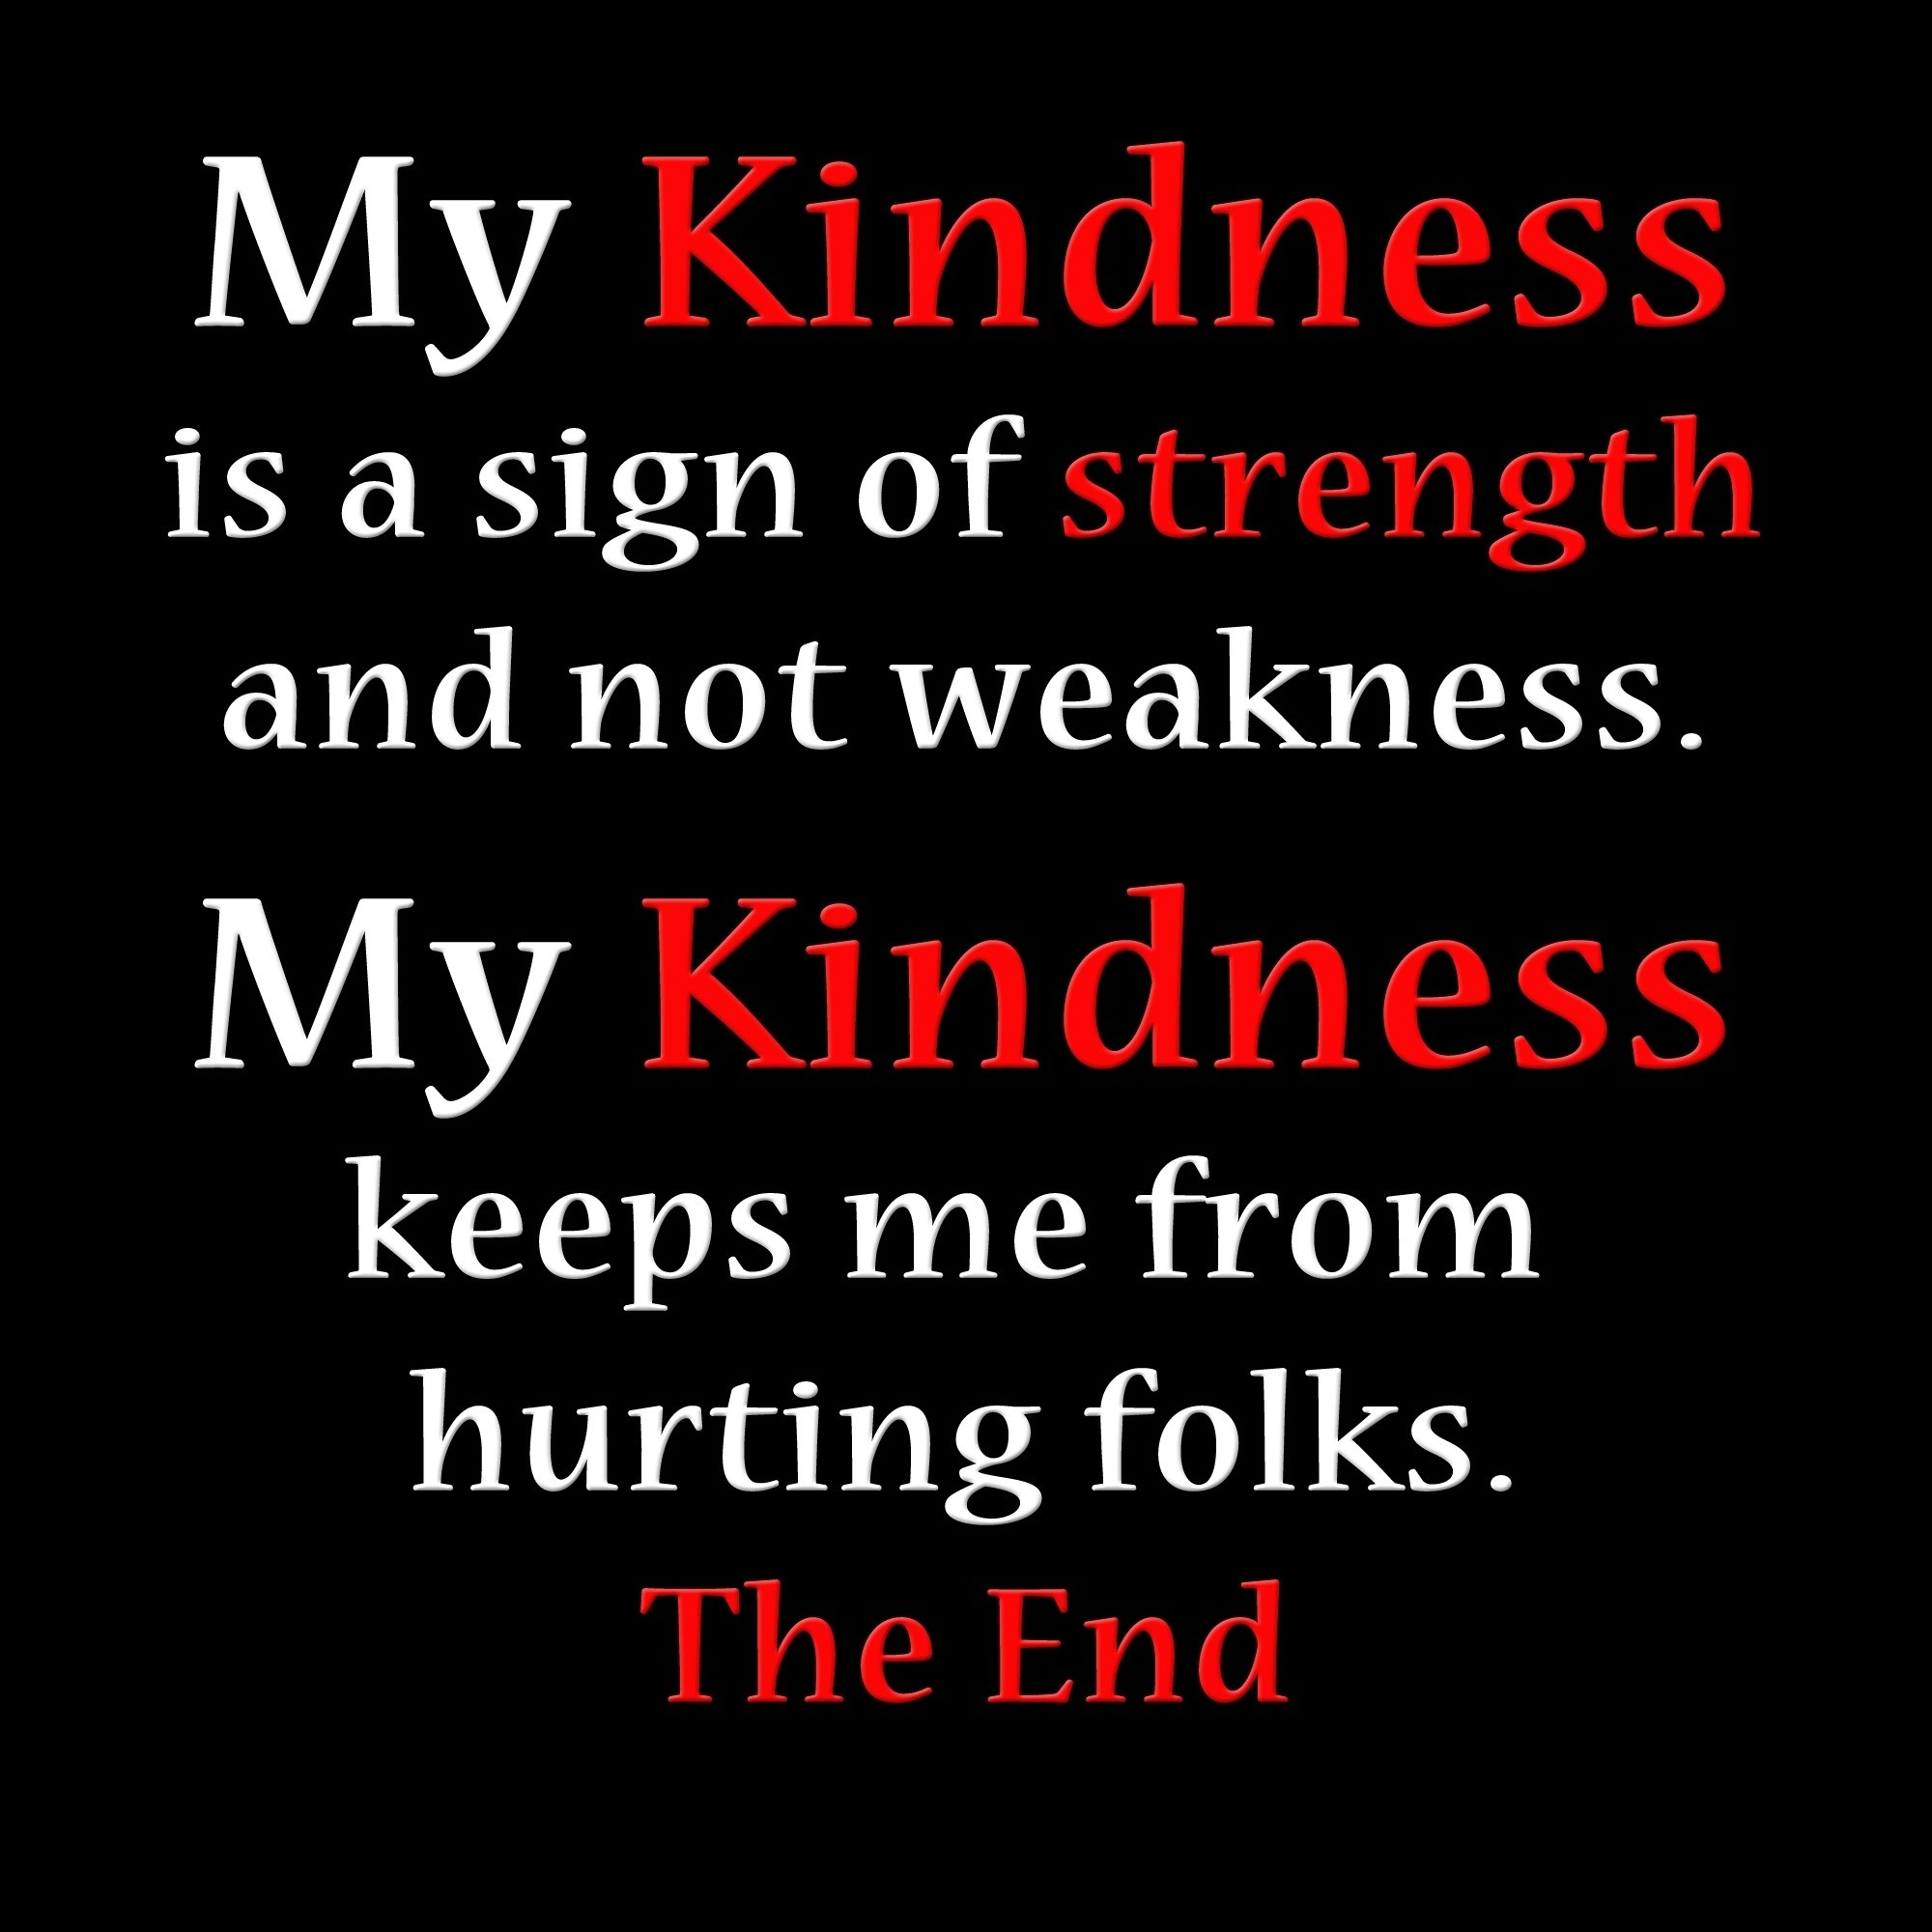 Broken Heart Quotes Short Broken Heart Images With - My Kindness Is A Sign Of Strength - HD Wallpaper 